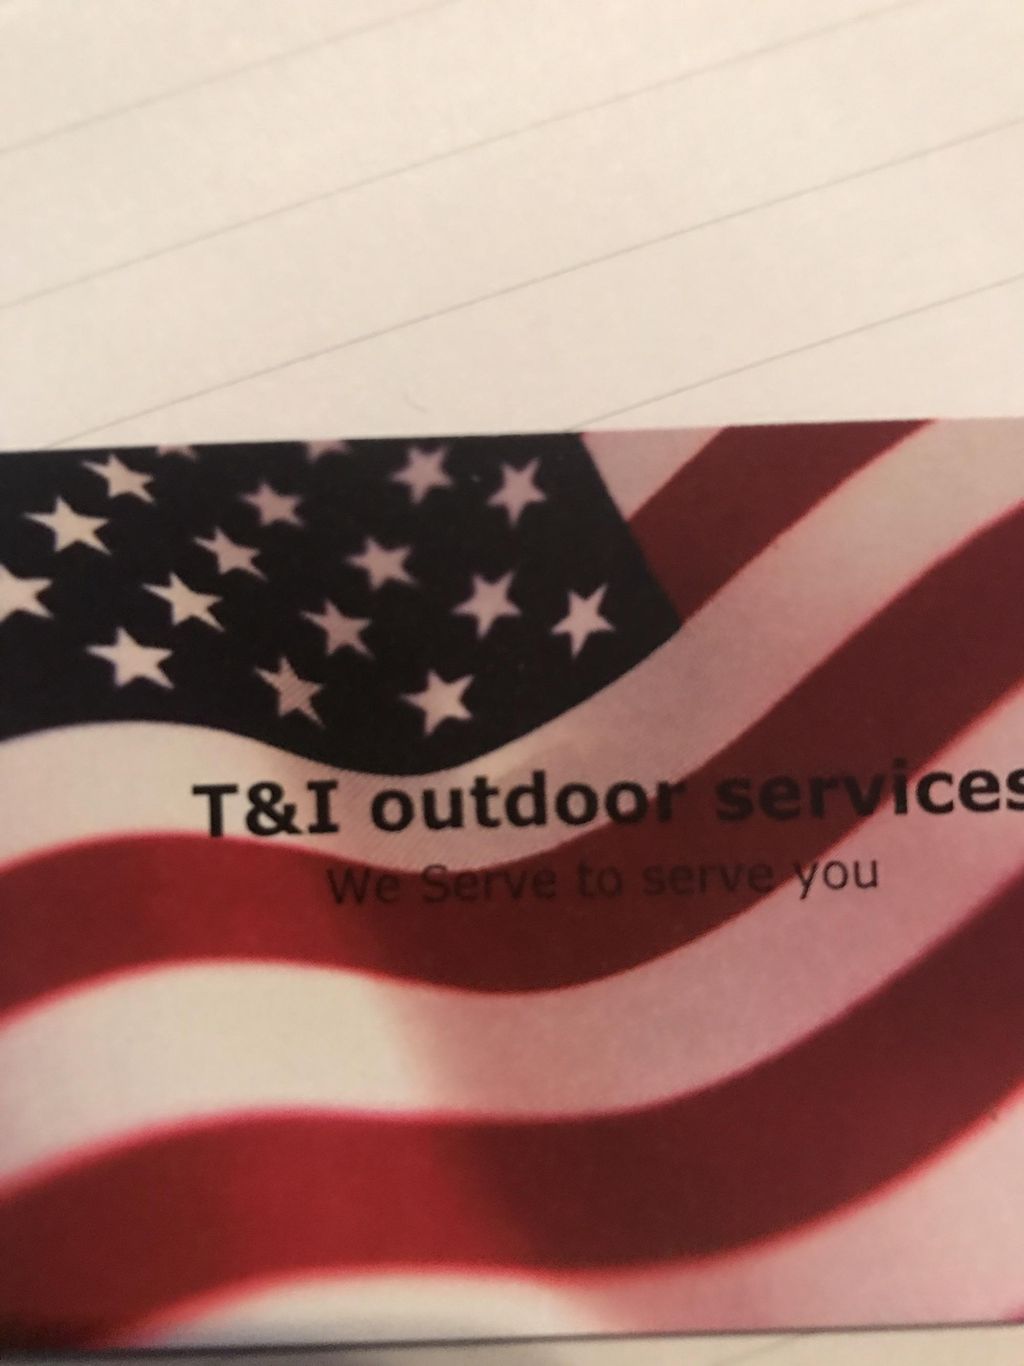 T&I outdoor services